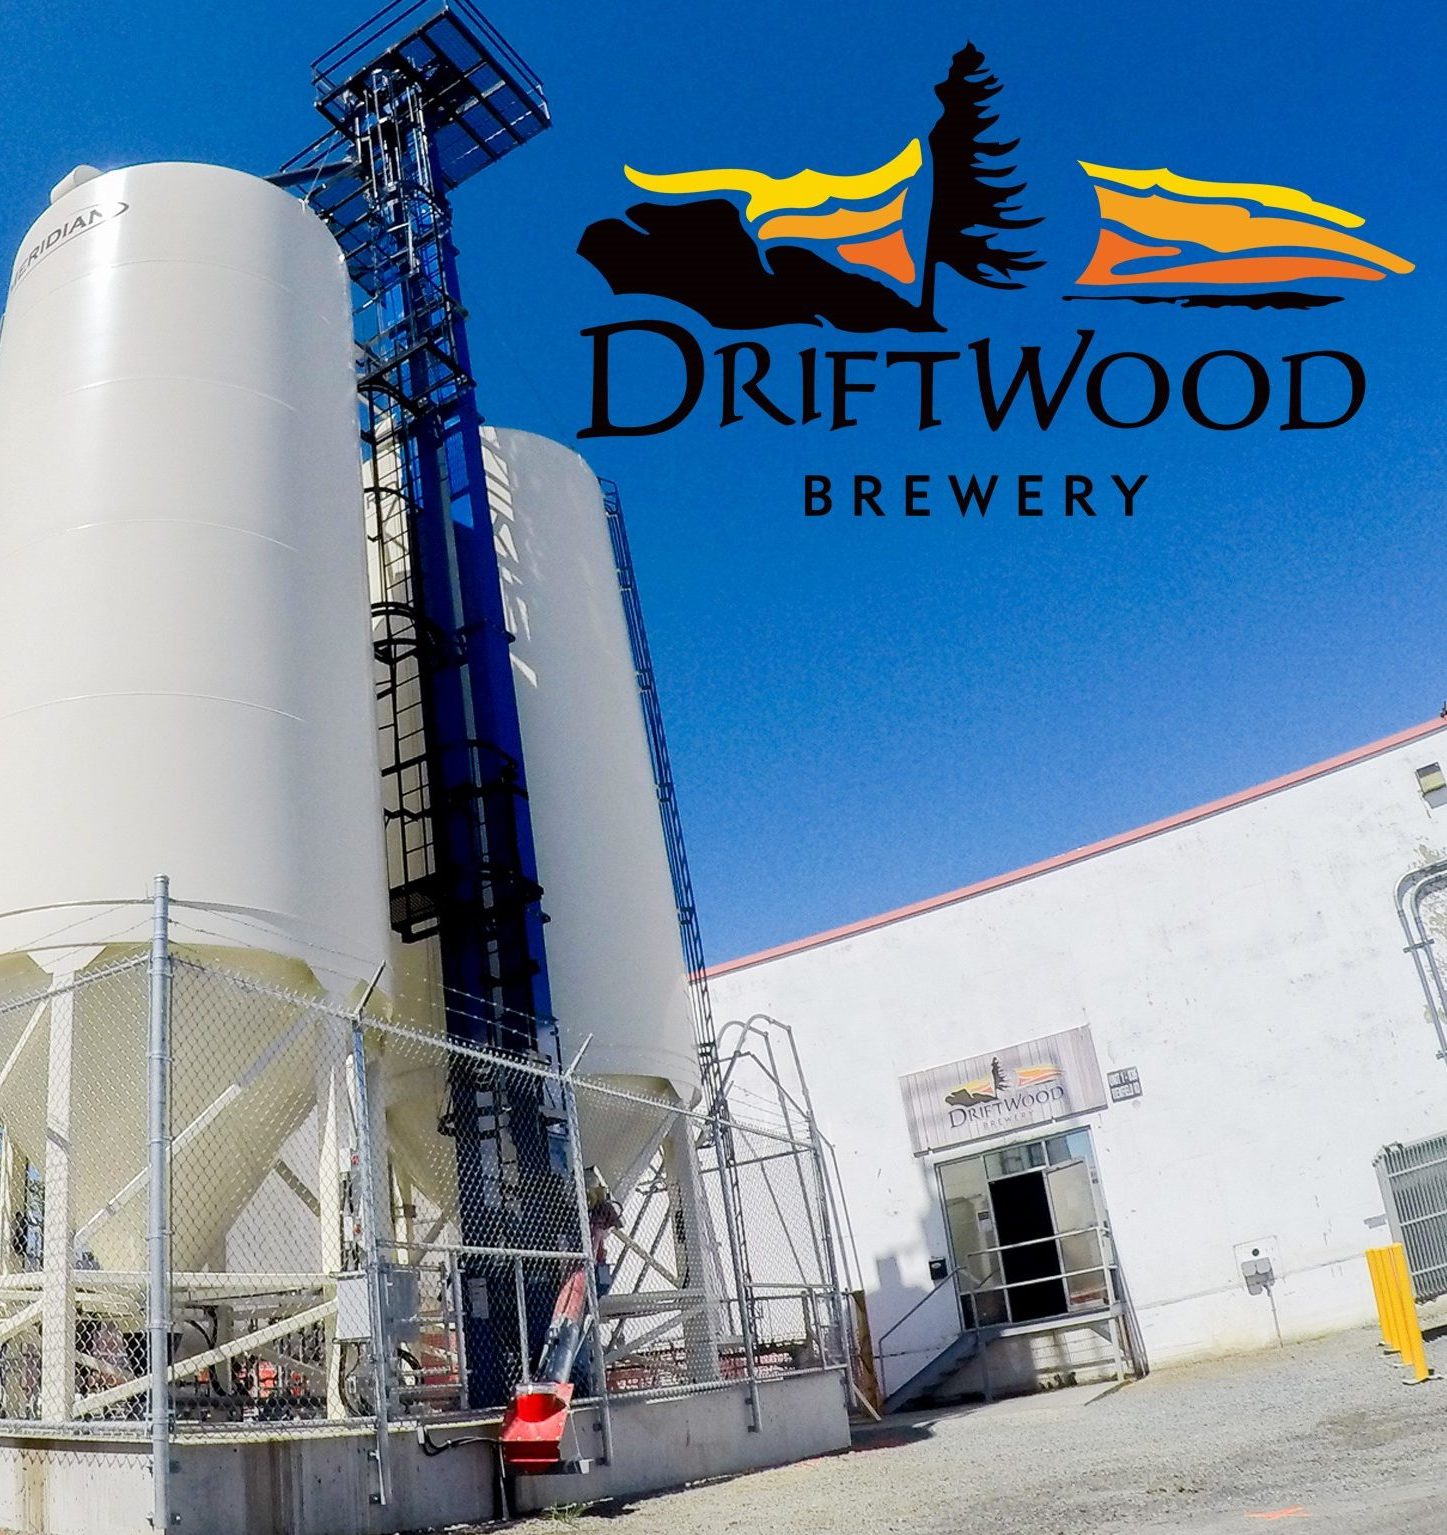 Driftwood Brewery logo and building.